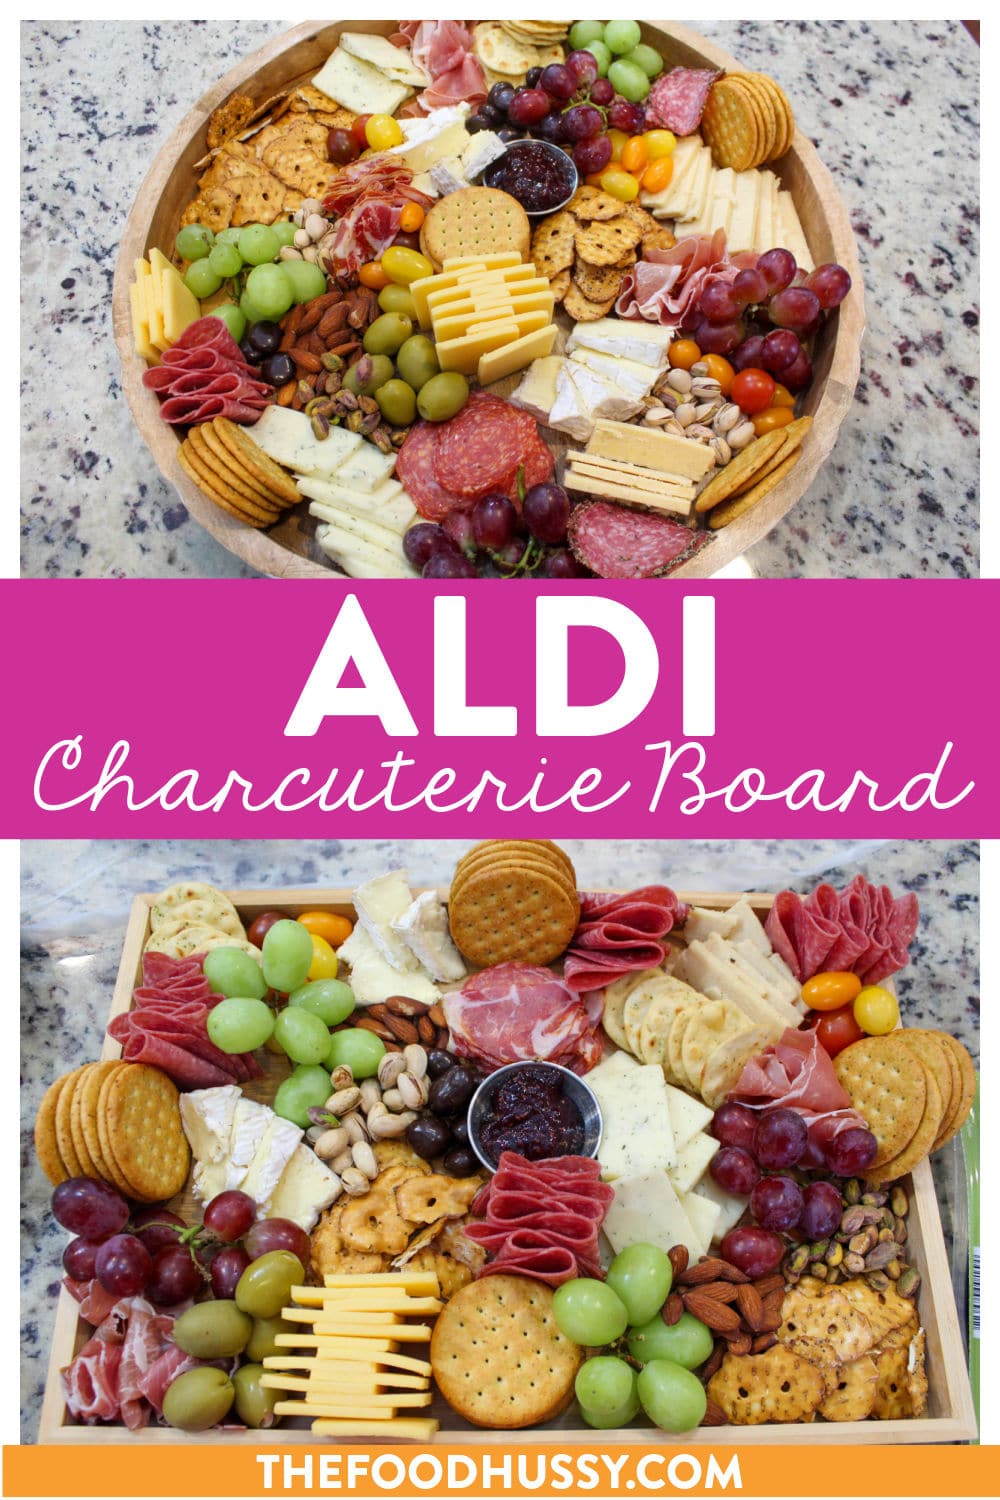 Creating an Aldi Charcuterie Board is easy and affordable! Grab your cart and explore the snacks, deli and produce sections to put together a platter of delicious meats, cheeses, crackers and more - on a budget! via @foodhussy